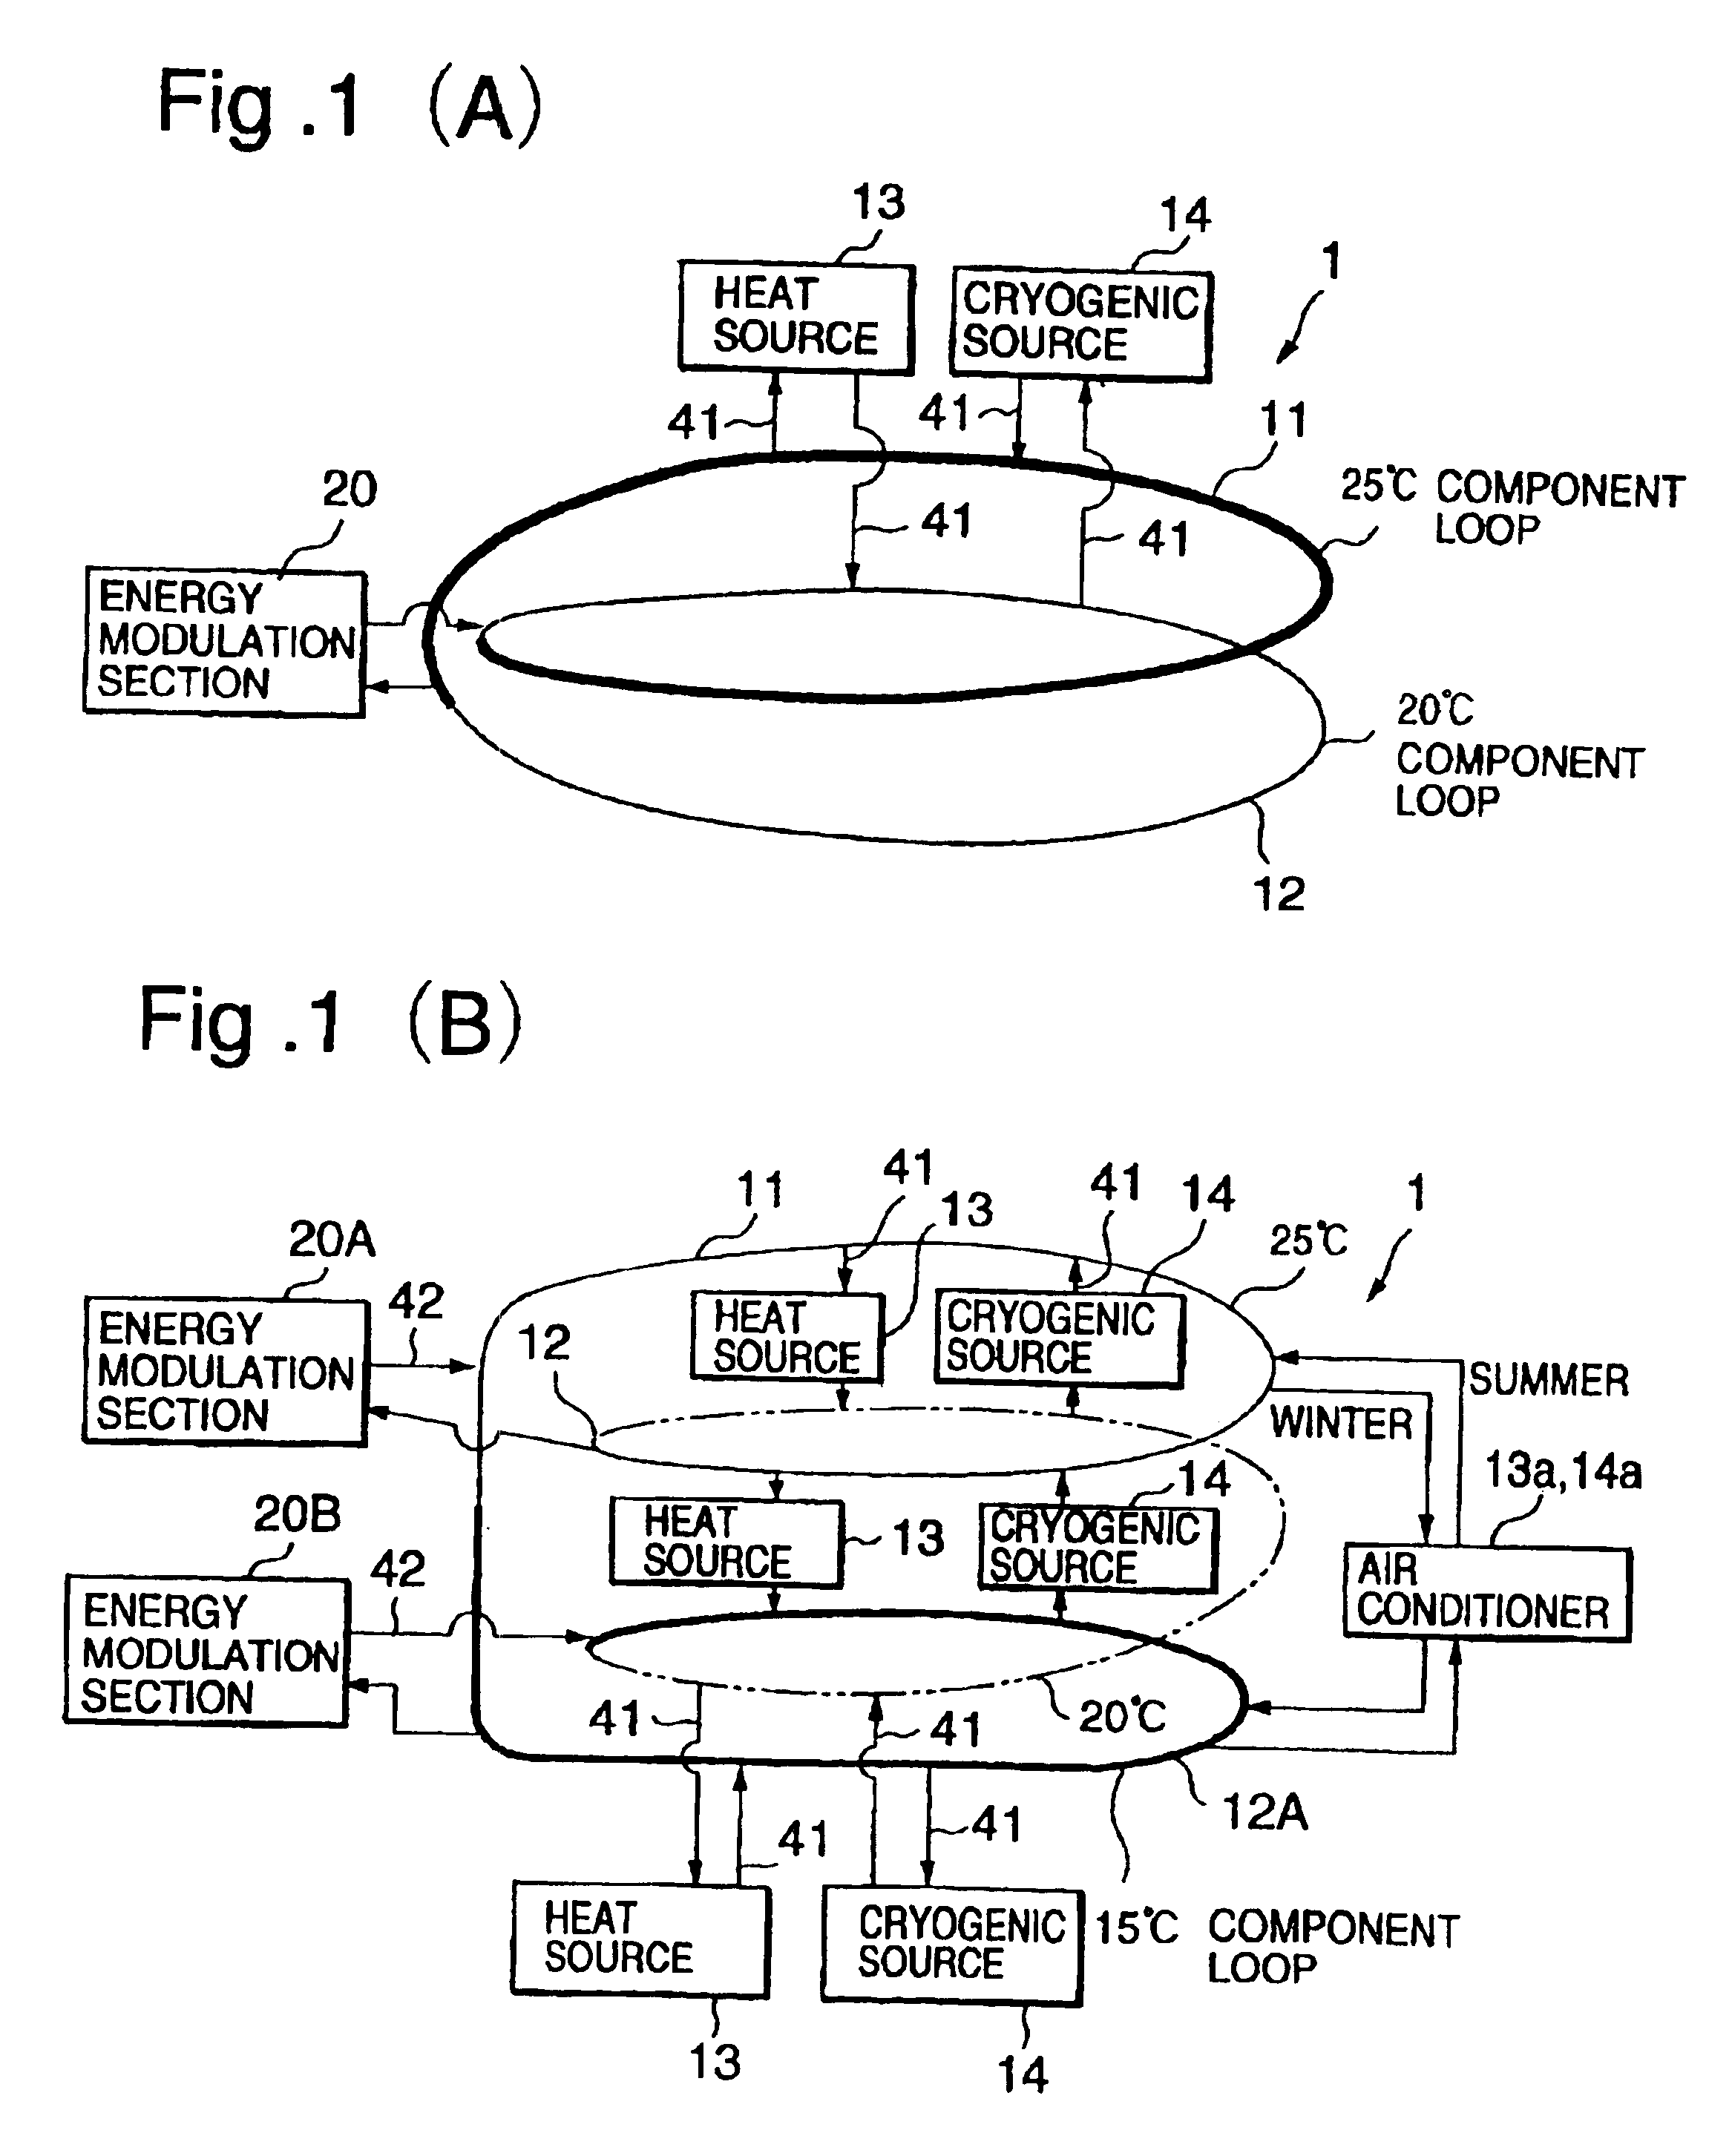 Inter-region thermal complementary system by distributed cryogenic and thermal devices